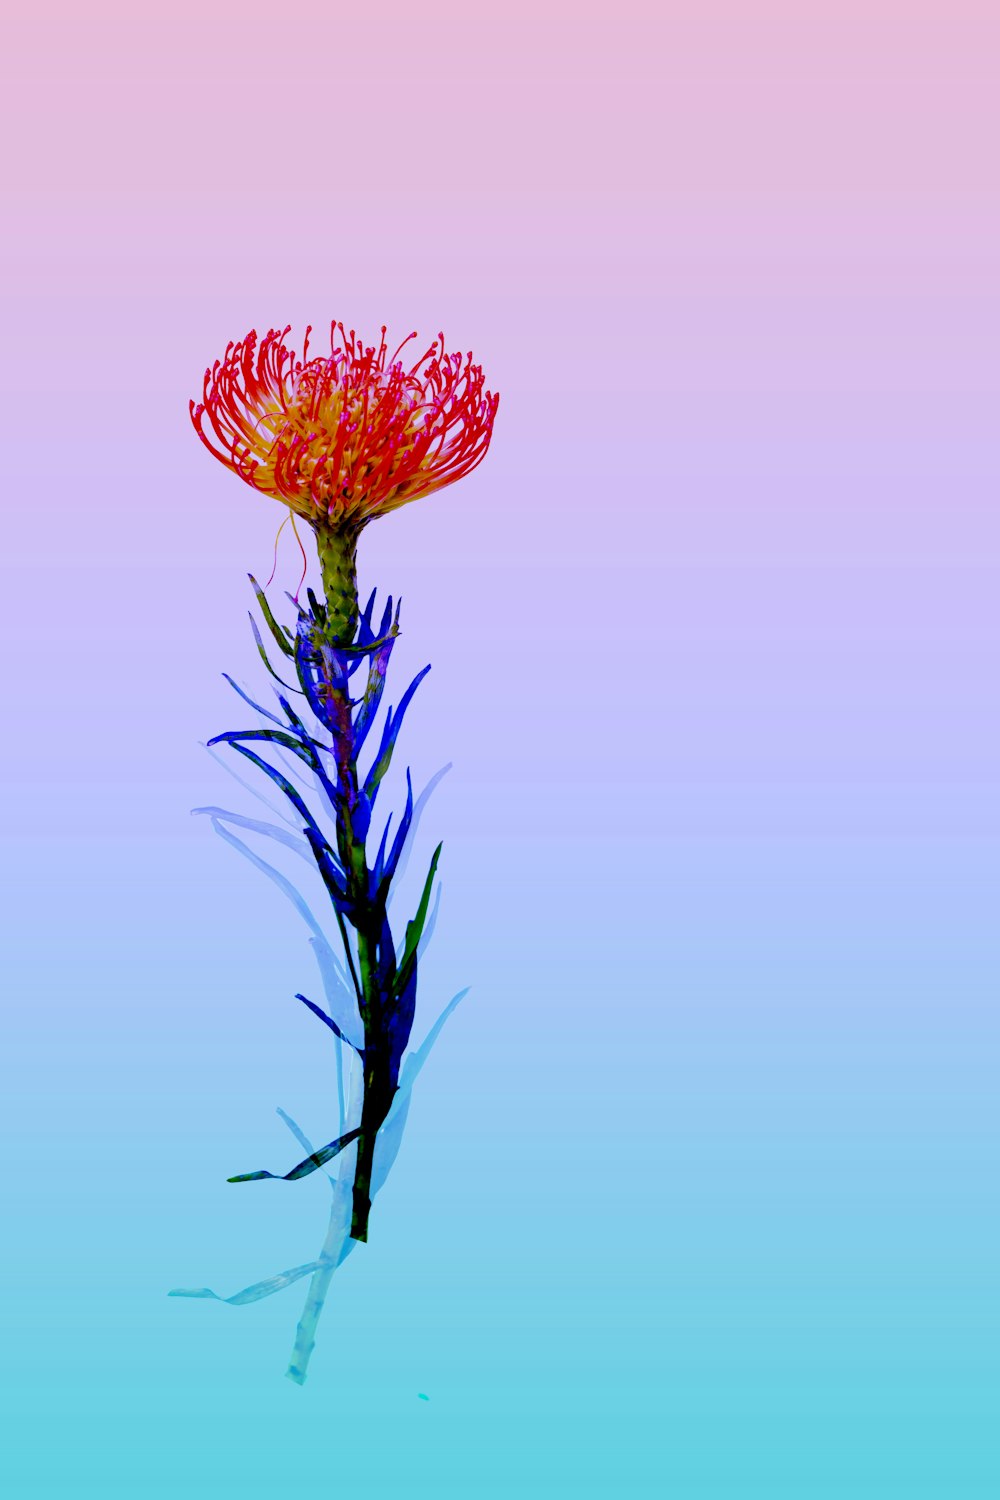 a red and yellow flower on a blue and pink background